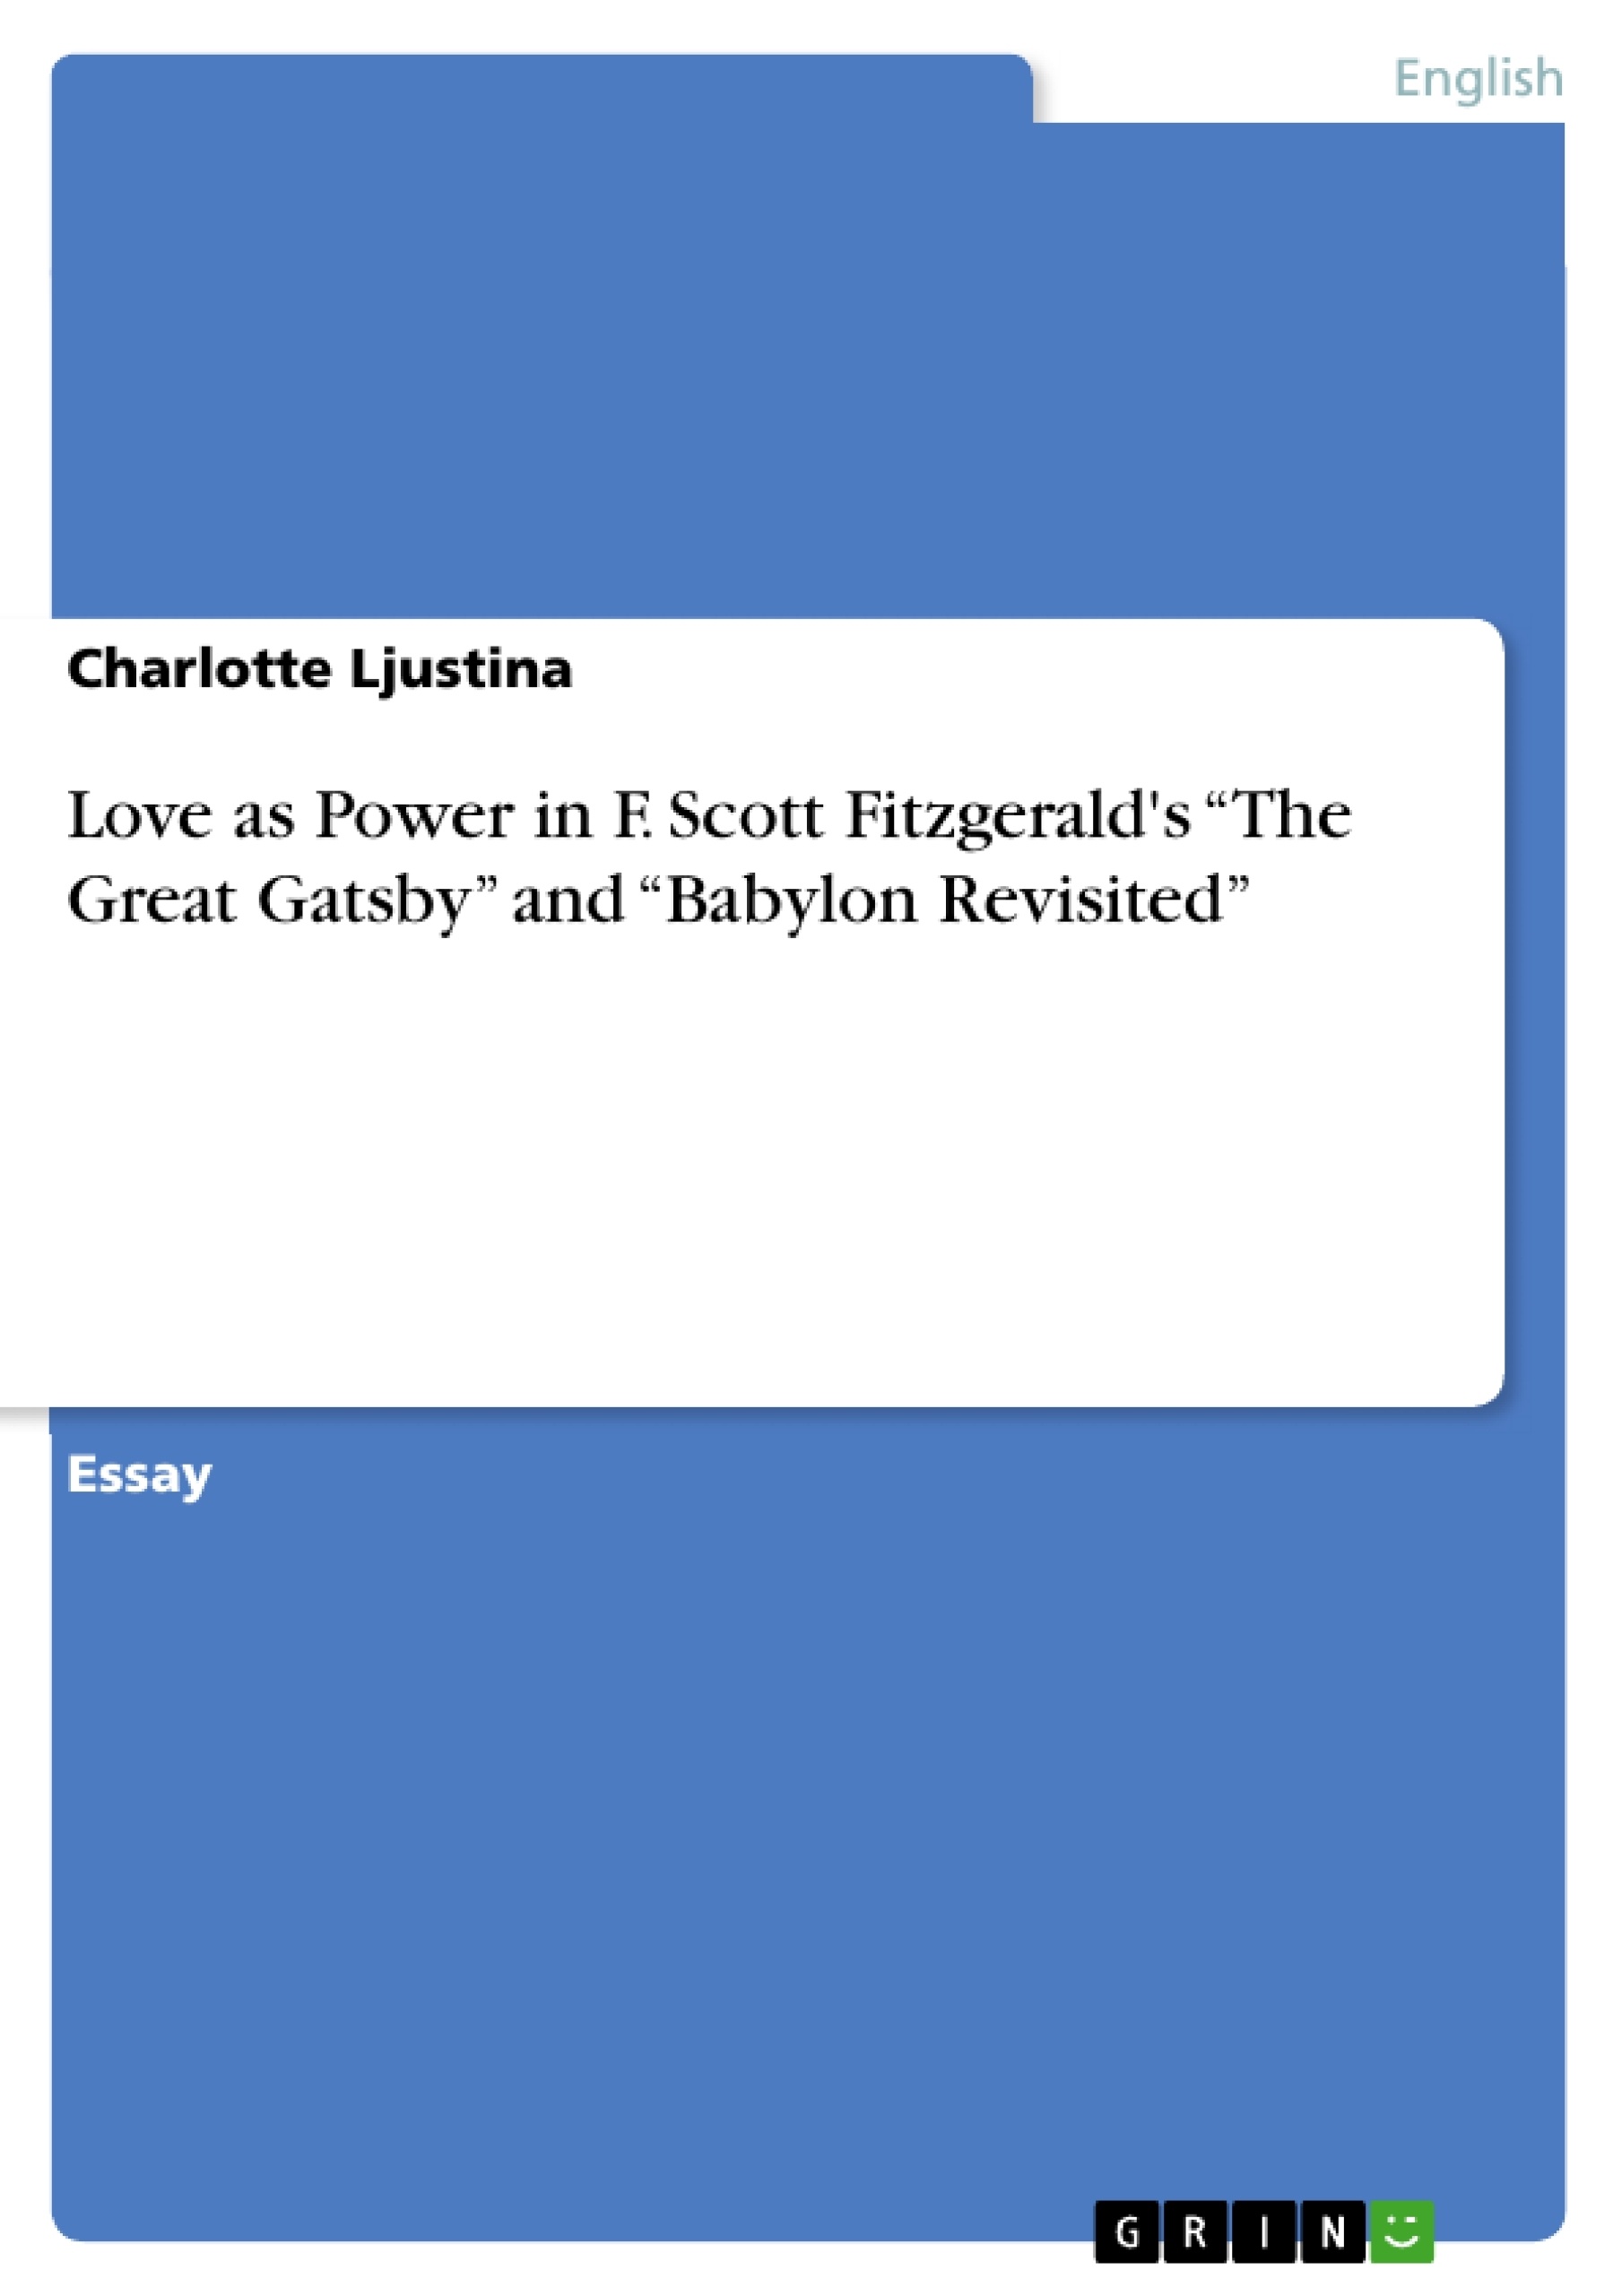 Title: Love as Power in F. Scott Fitzgerald's “The Great Gatsby” and “Babylon Revisited”